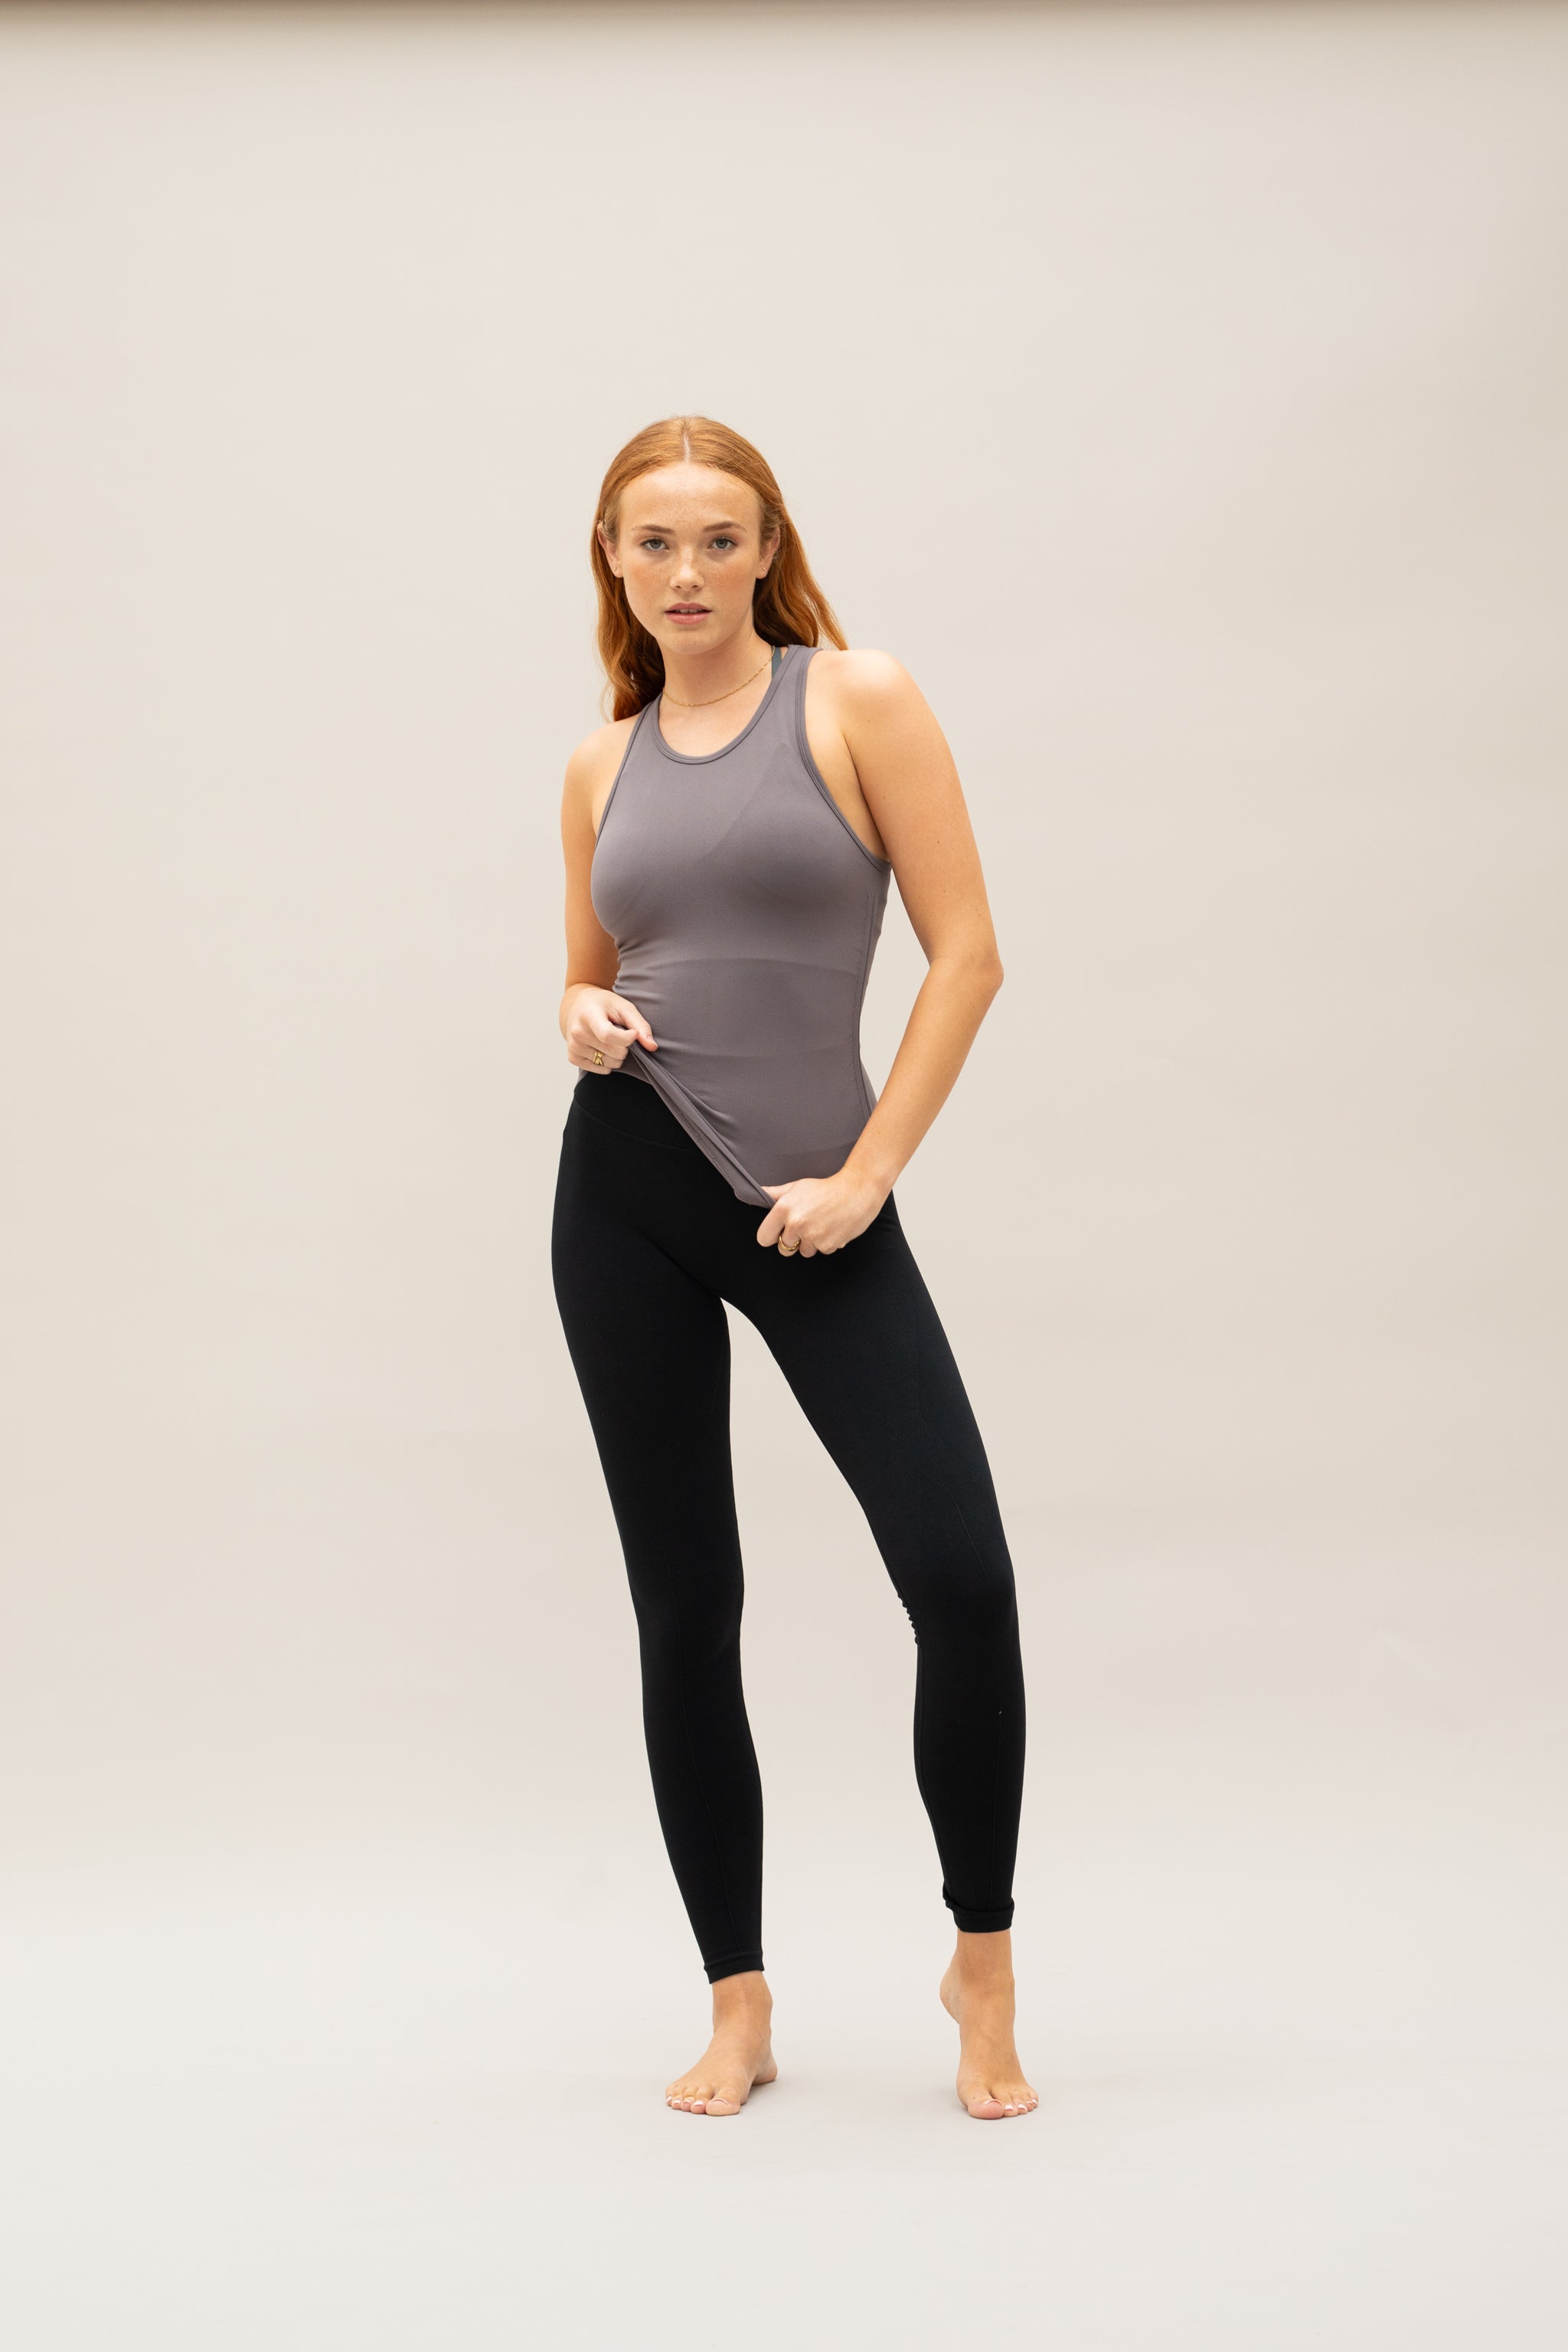 Model wearing grey recycled yoga top for sustainable women's activewear brand Jilla